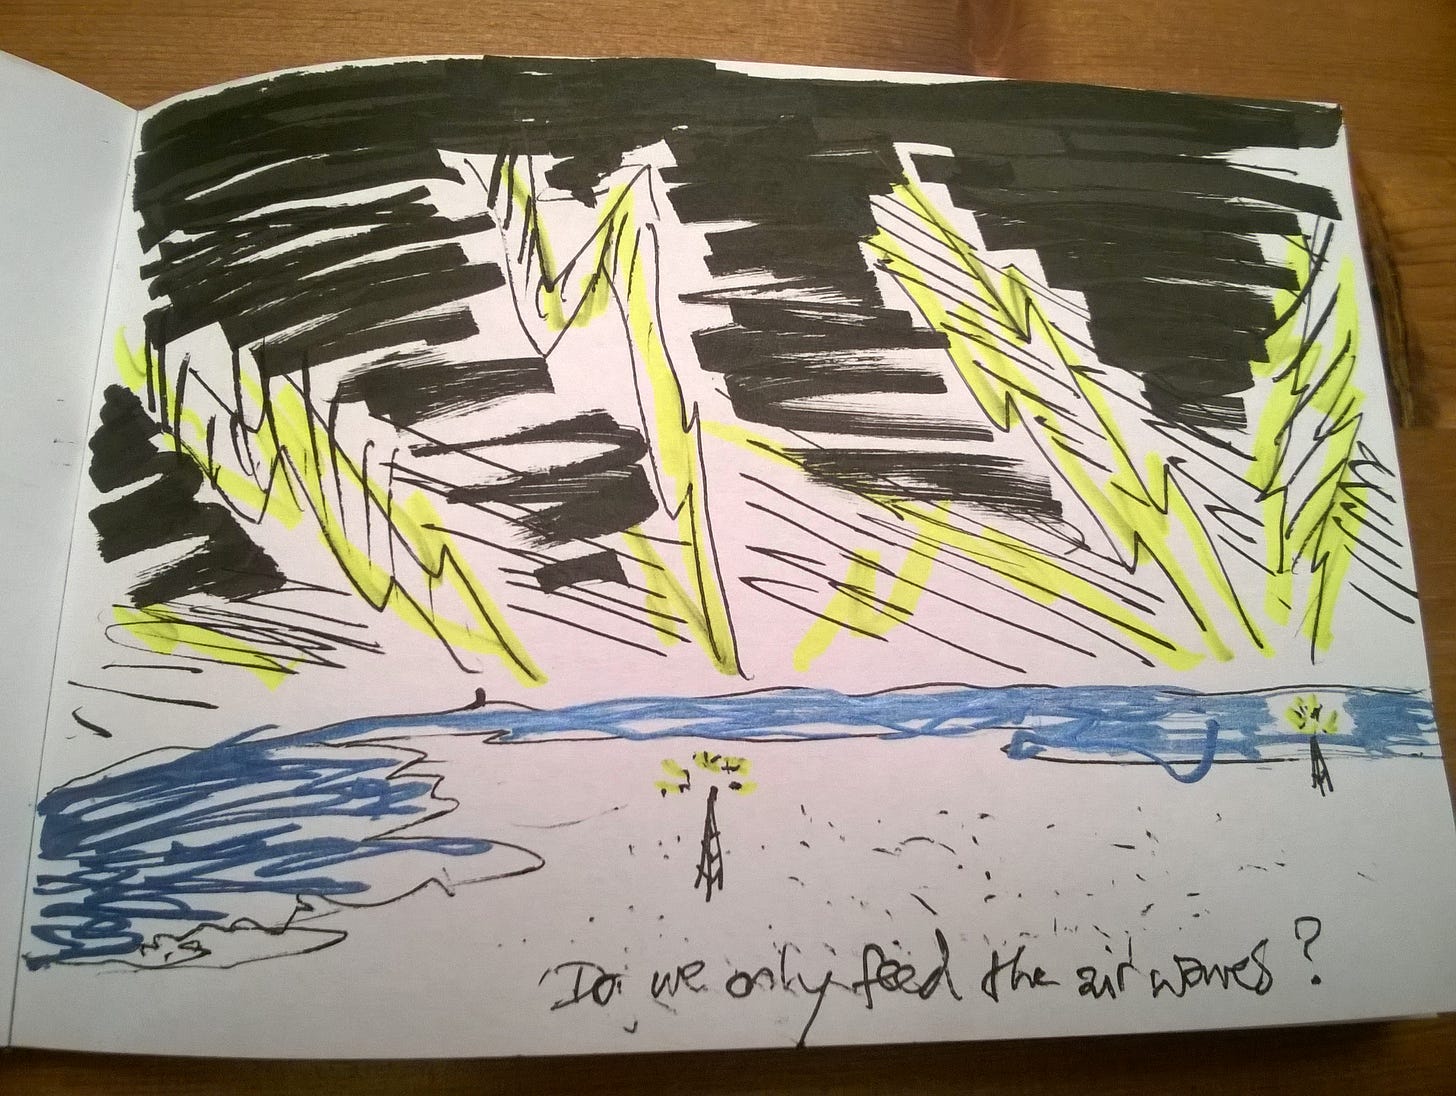 Marker sketch of radio towers beaming signals across an ocean, captioned "Do we only feed the airwaves?"